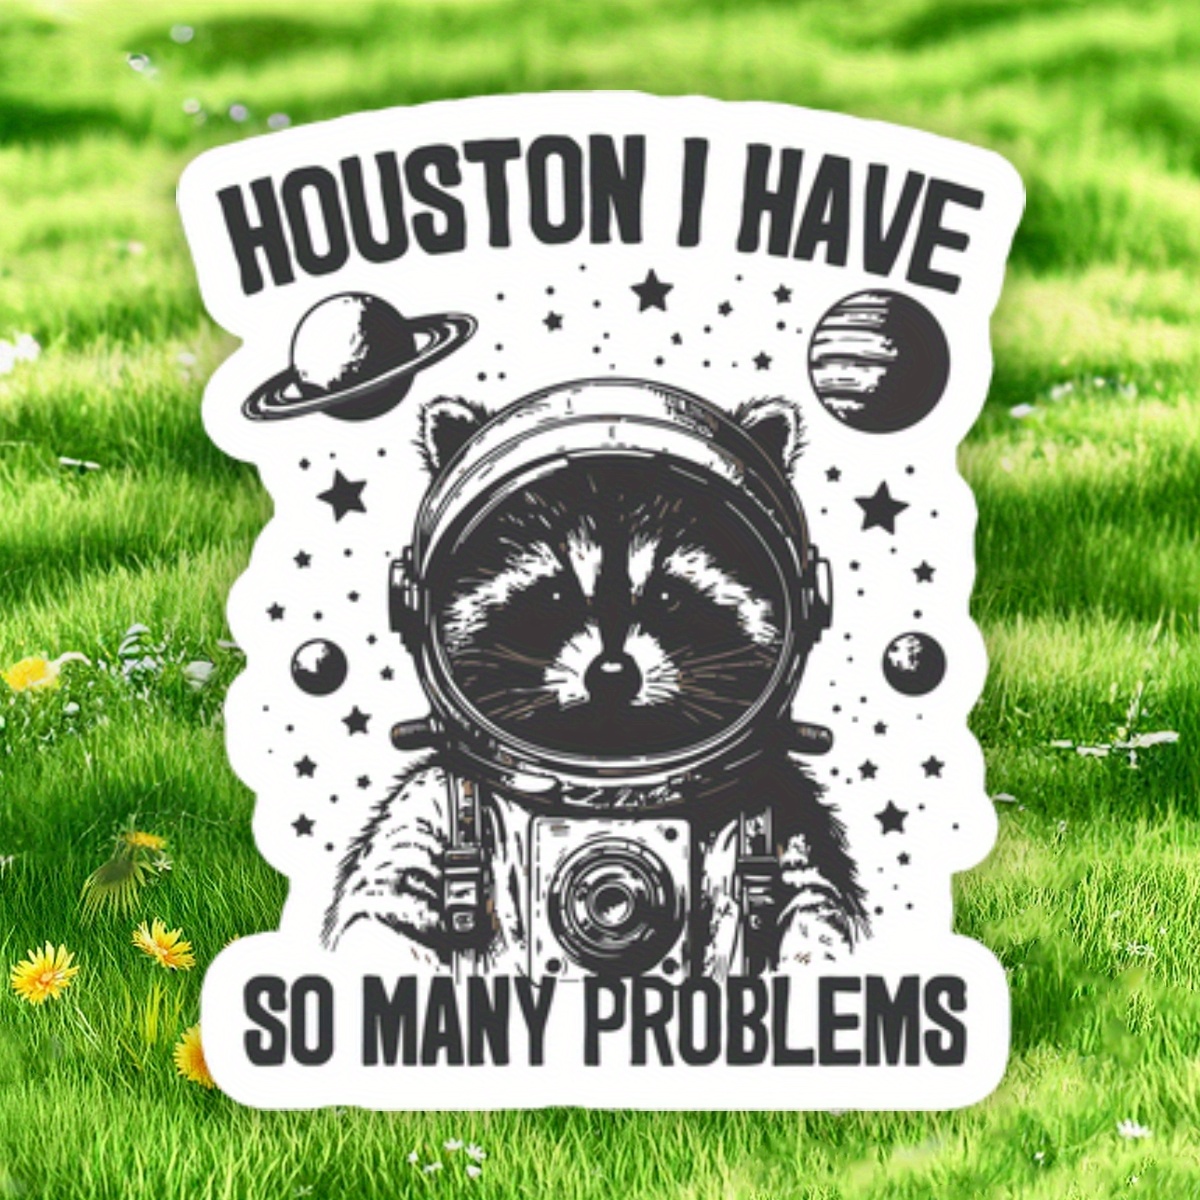 

1pc Durable Waterproof Polypropylene Space Raccoon Decal Sticker, Funny Meme Decal For Cars, Laptops, Water Bottles, Notebooks - "houston I Have So Many Problems" Design